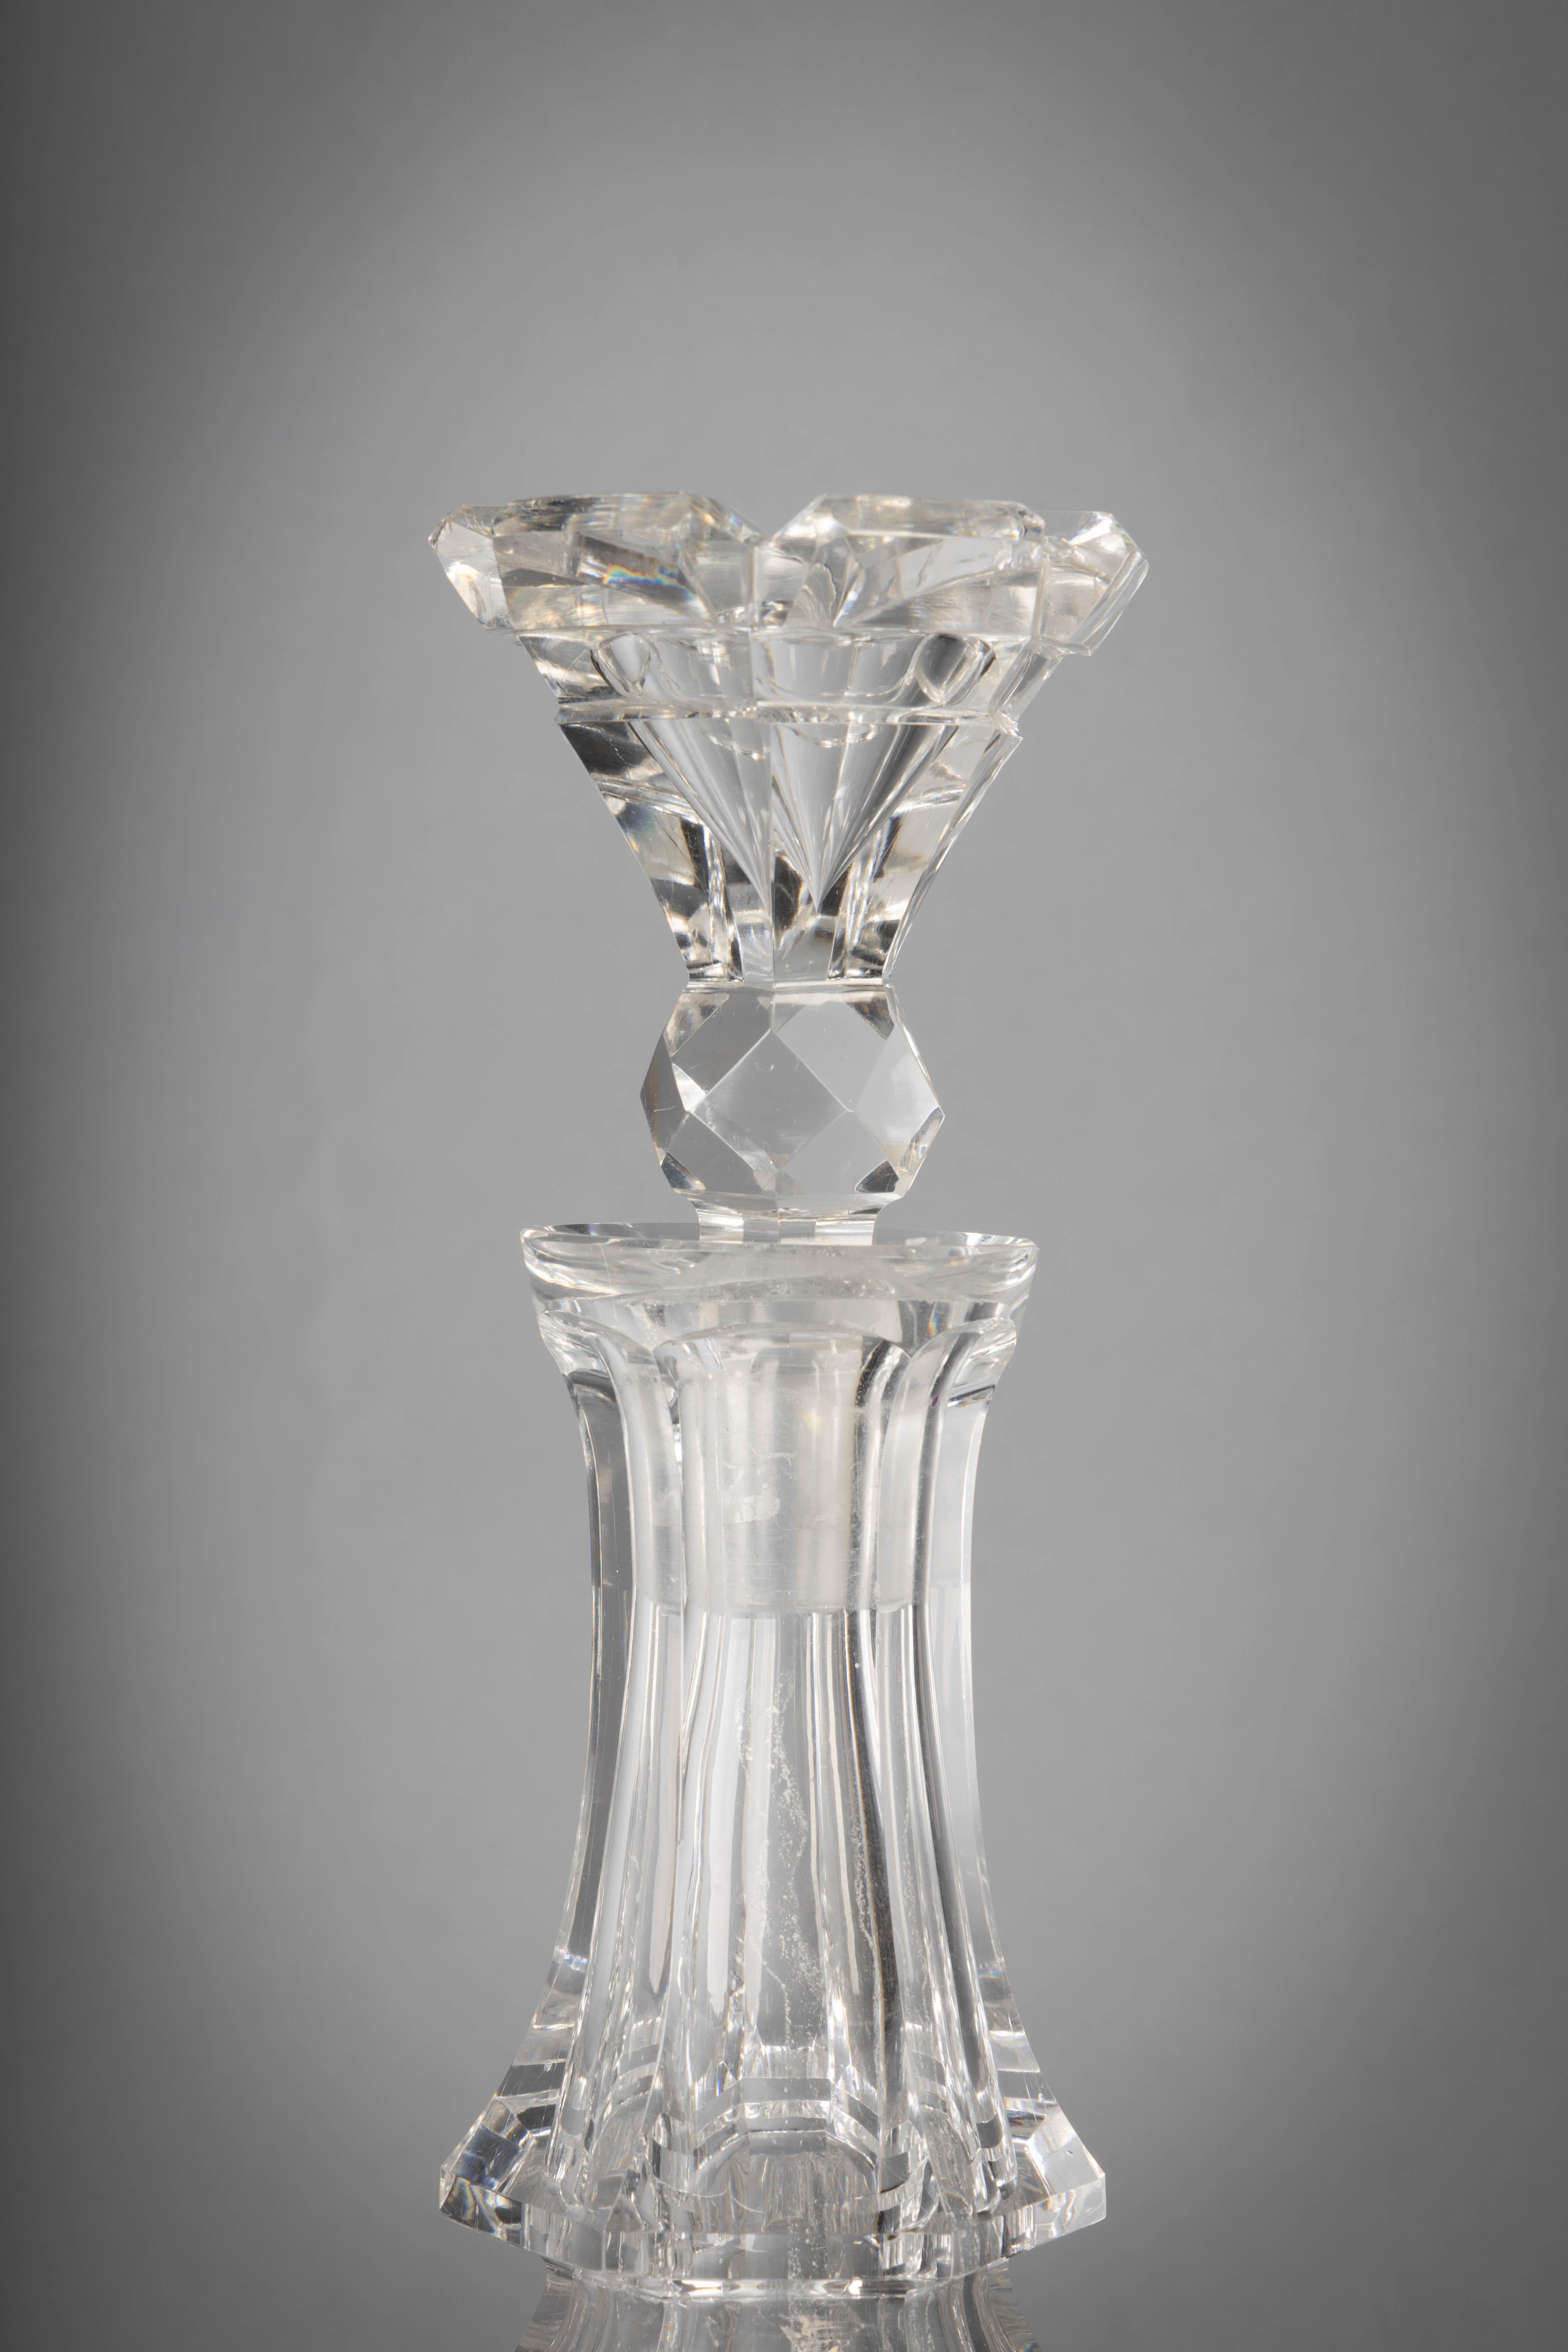 The stopper with a hexagonal faceted design with interior 